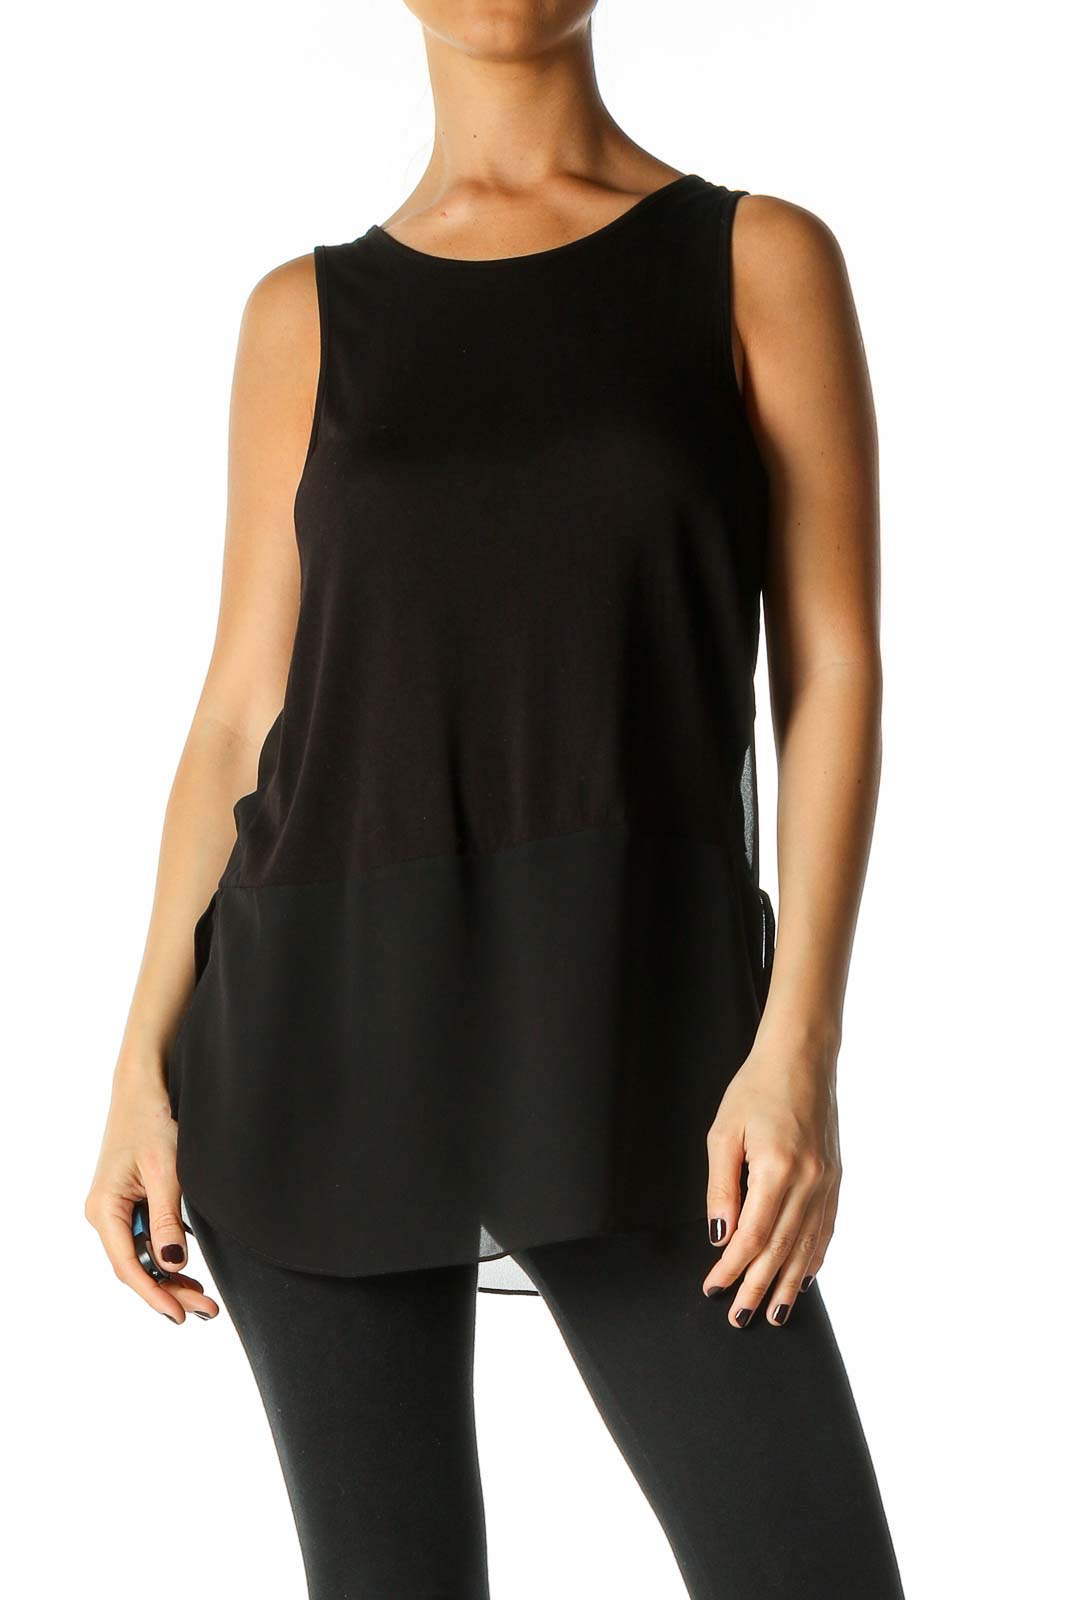 Black Solid Tank Top Front